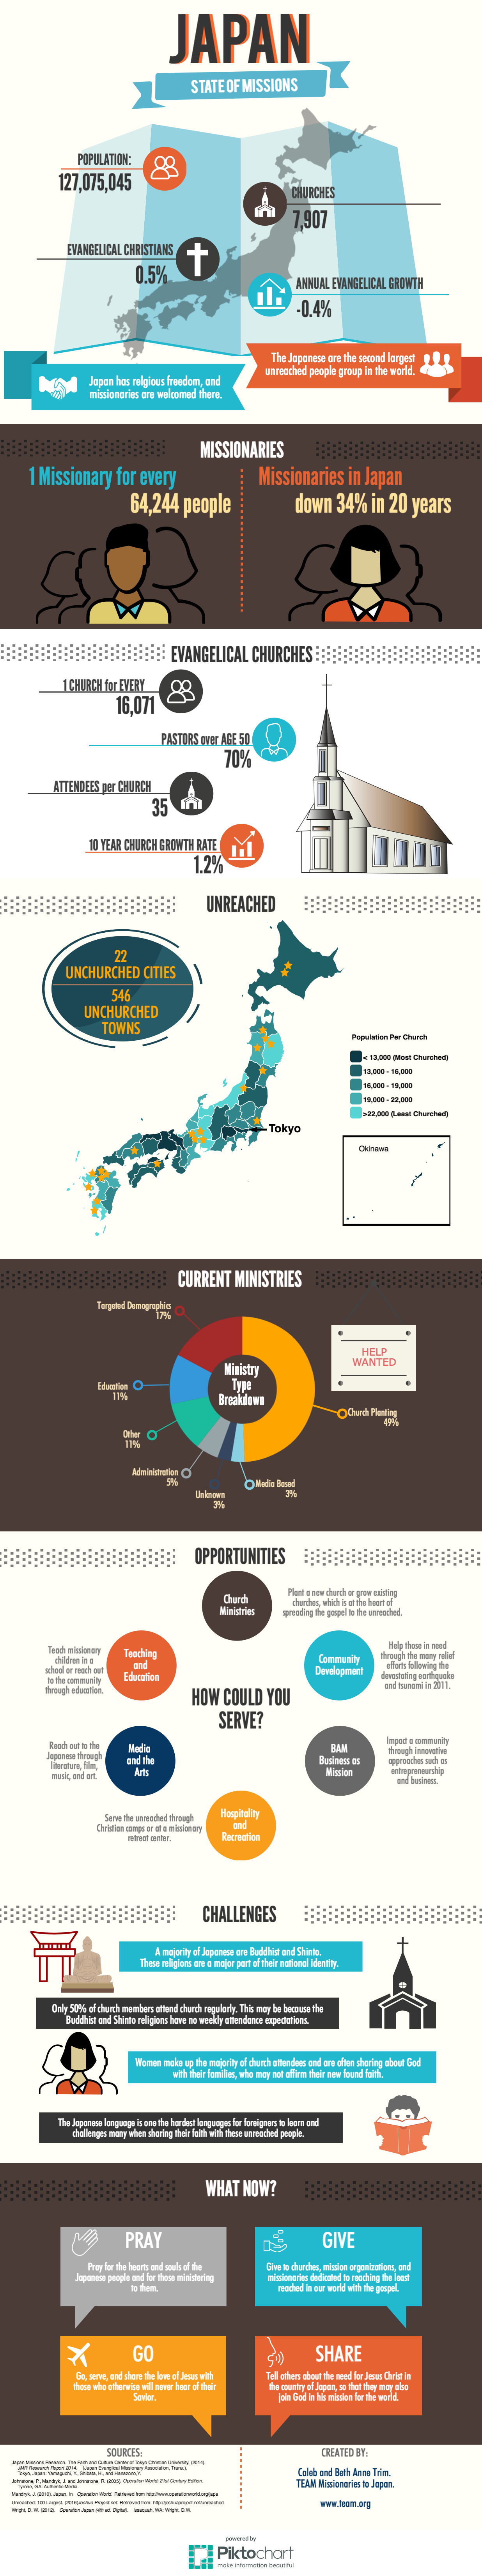 missions-japan-infographic.png